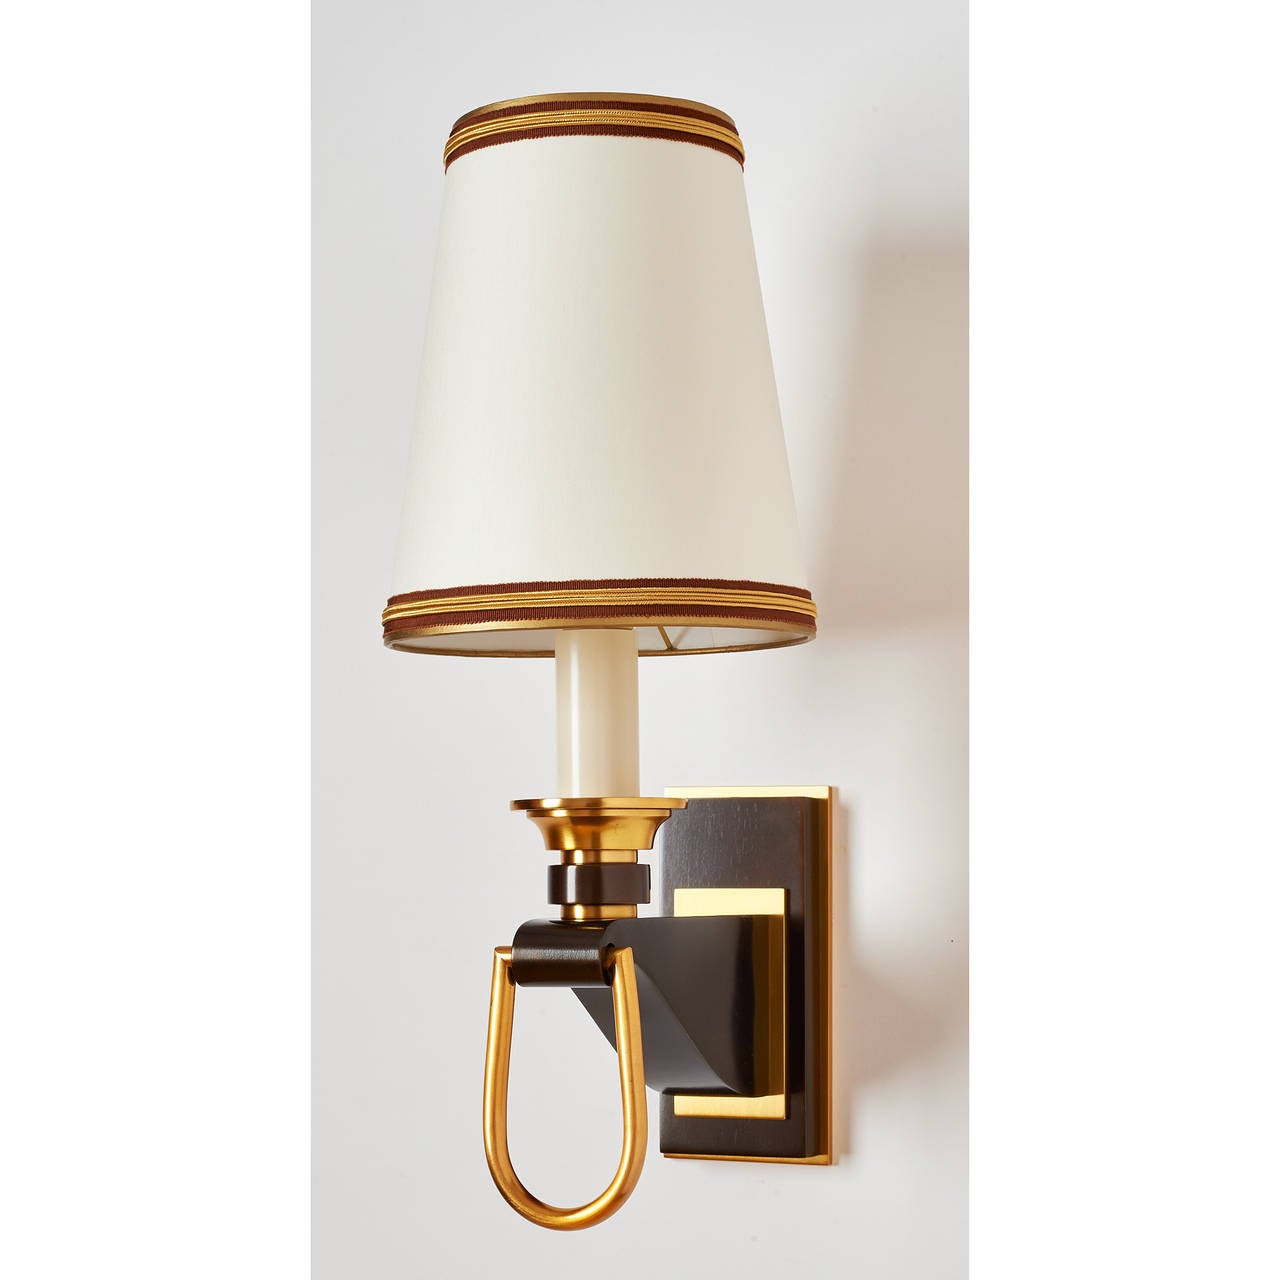 France, 1950s.
Elegant pair of oxidized metal sconces with stirrup motif and polished brass mounts.
Dimensions: 18 H x 7.5 W x  10 D.
Rewired for use in the USA.